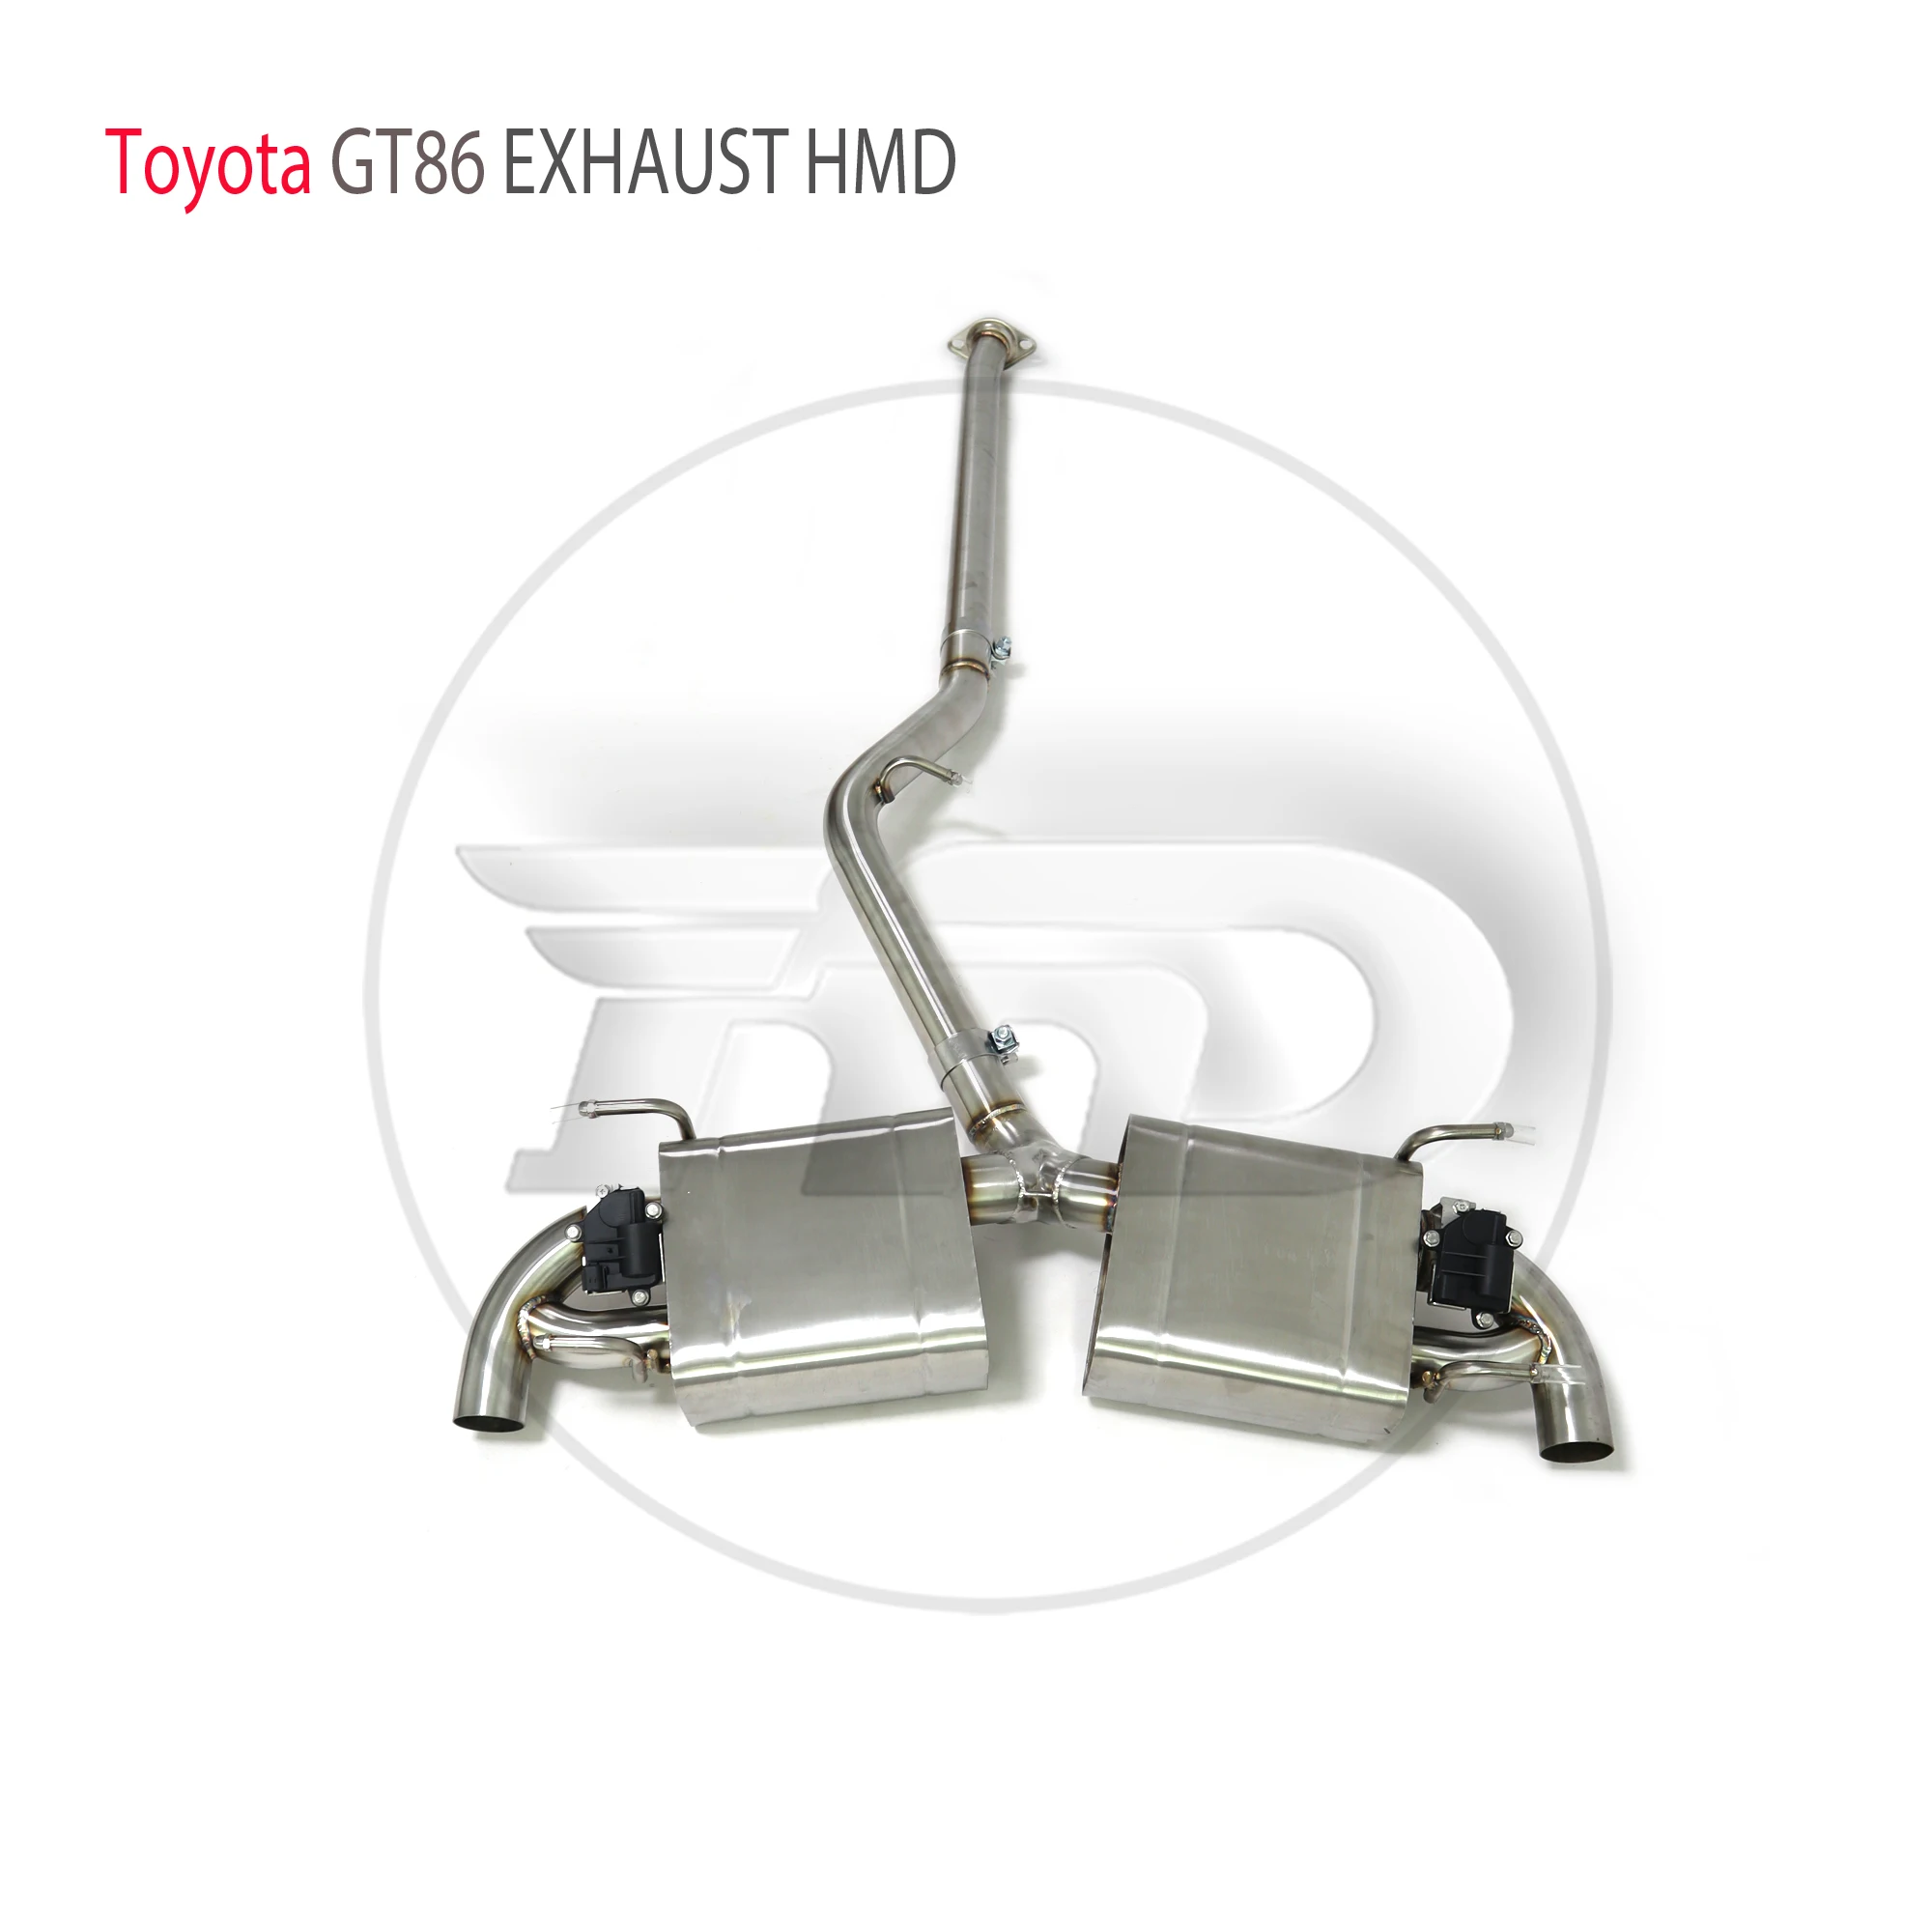 

HMD Stainless Steel Exhaust System Performance Catback For Toyota 86 GT86 GR86 2.0L 2013+ Car Muffler